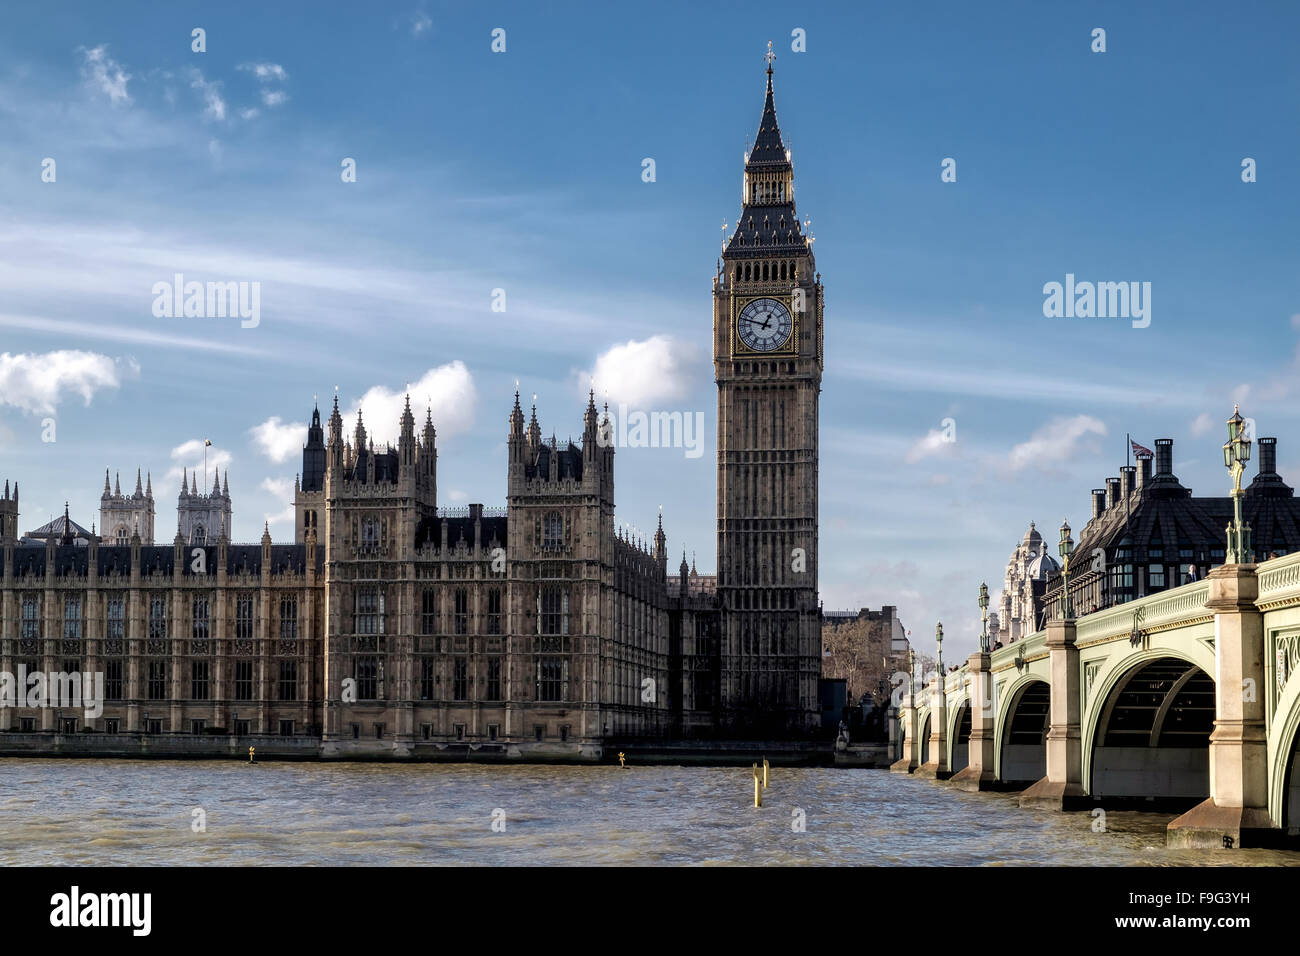 View of Big Ben and the Houses of Parliament Stock Photo